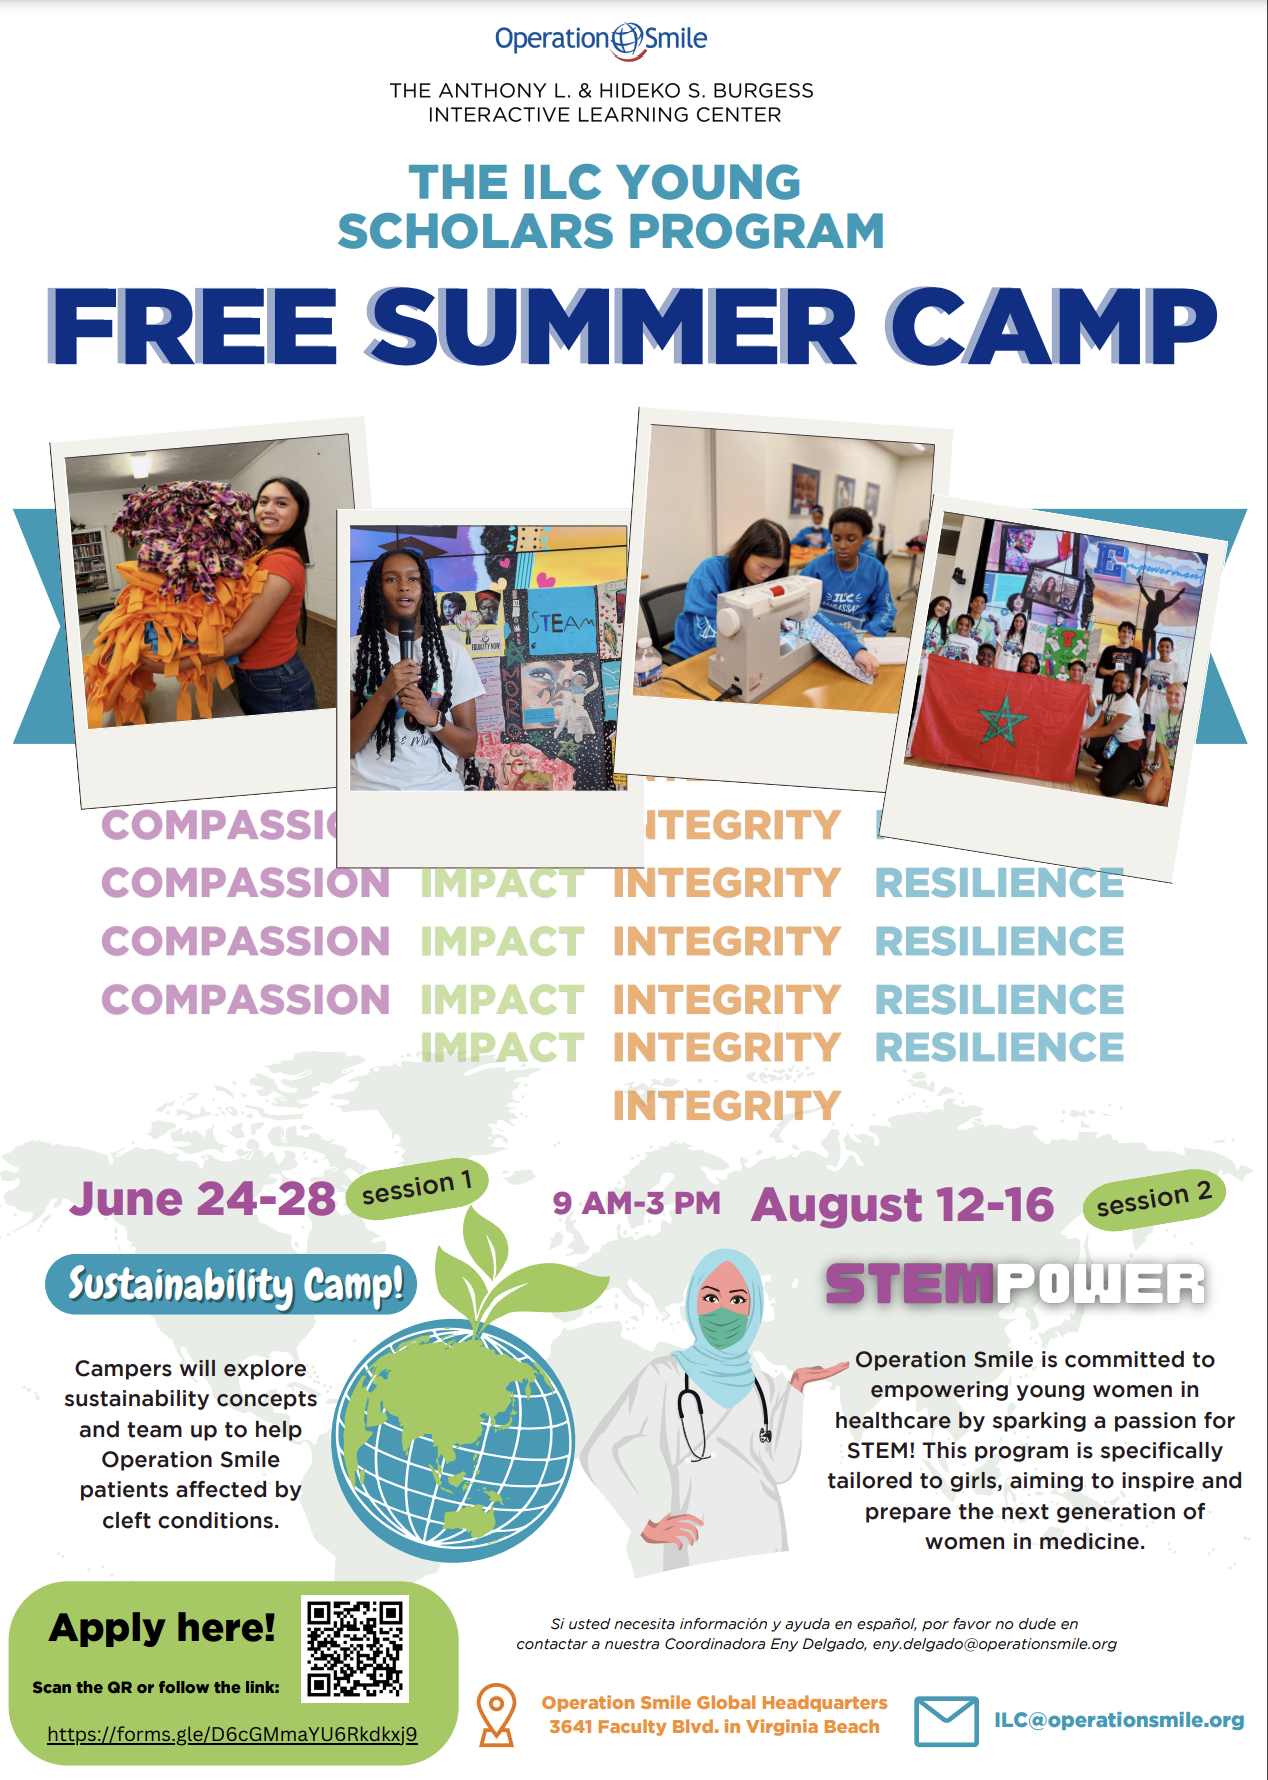 OPERATION SMILE ANNOUNCES FREE SUSTAINABILITY AND STEM SUMMER CAMPS FOR MIDDLE SCHOOL STUDENTS